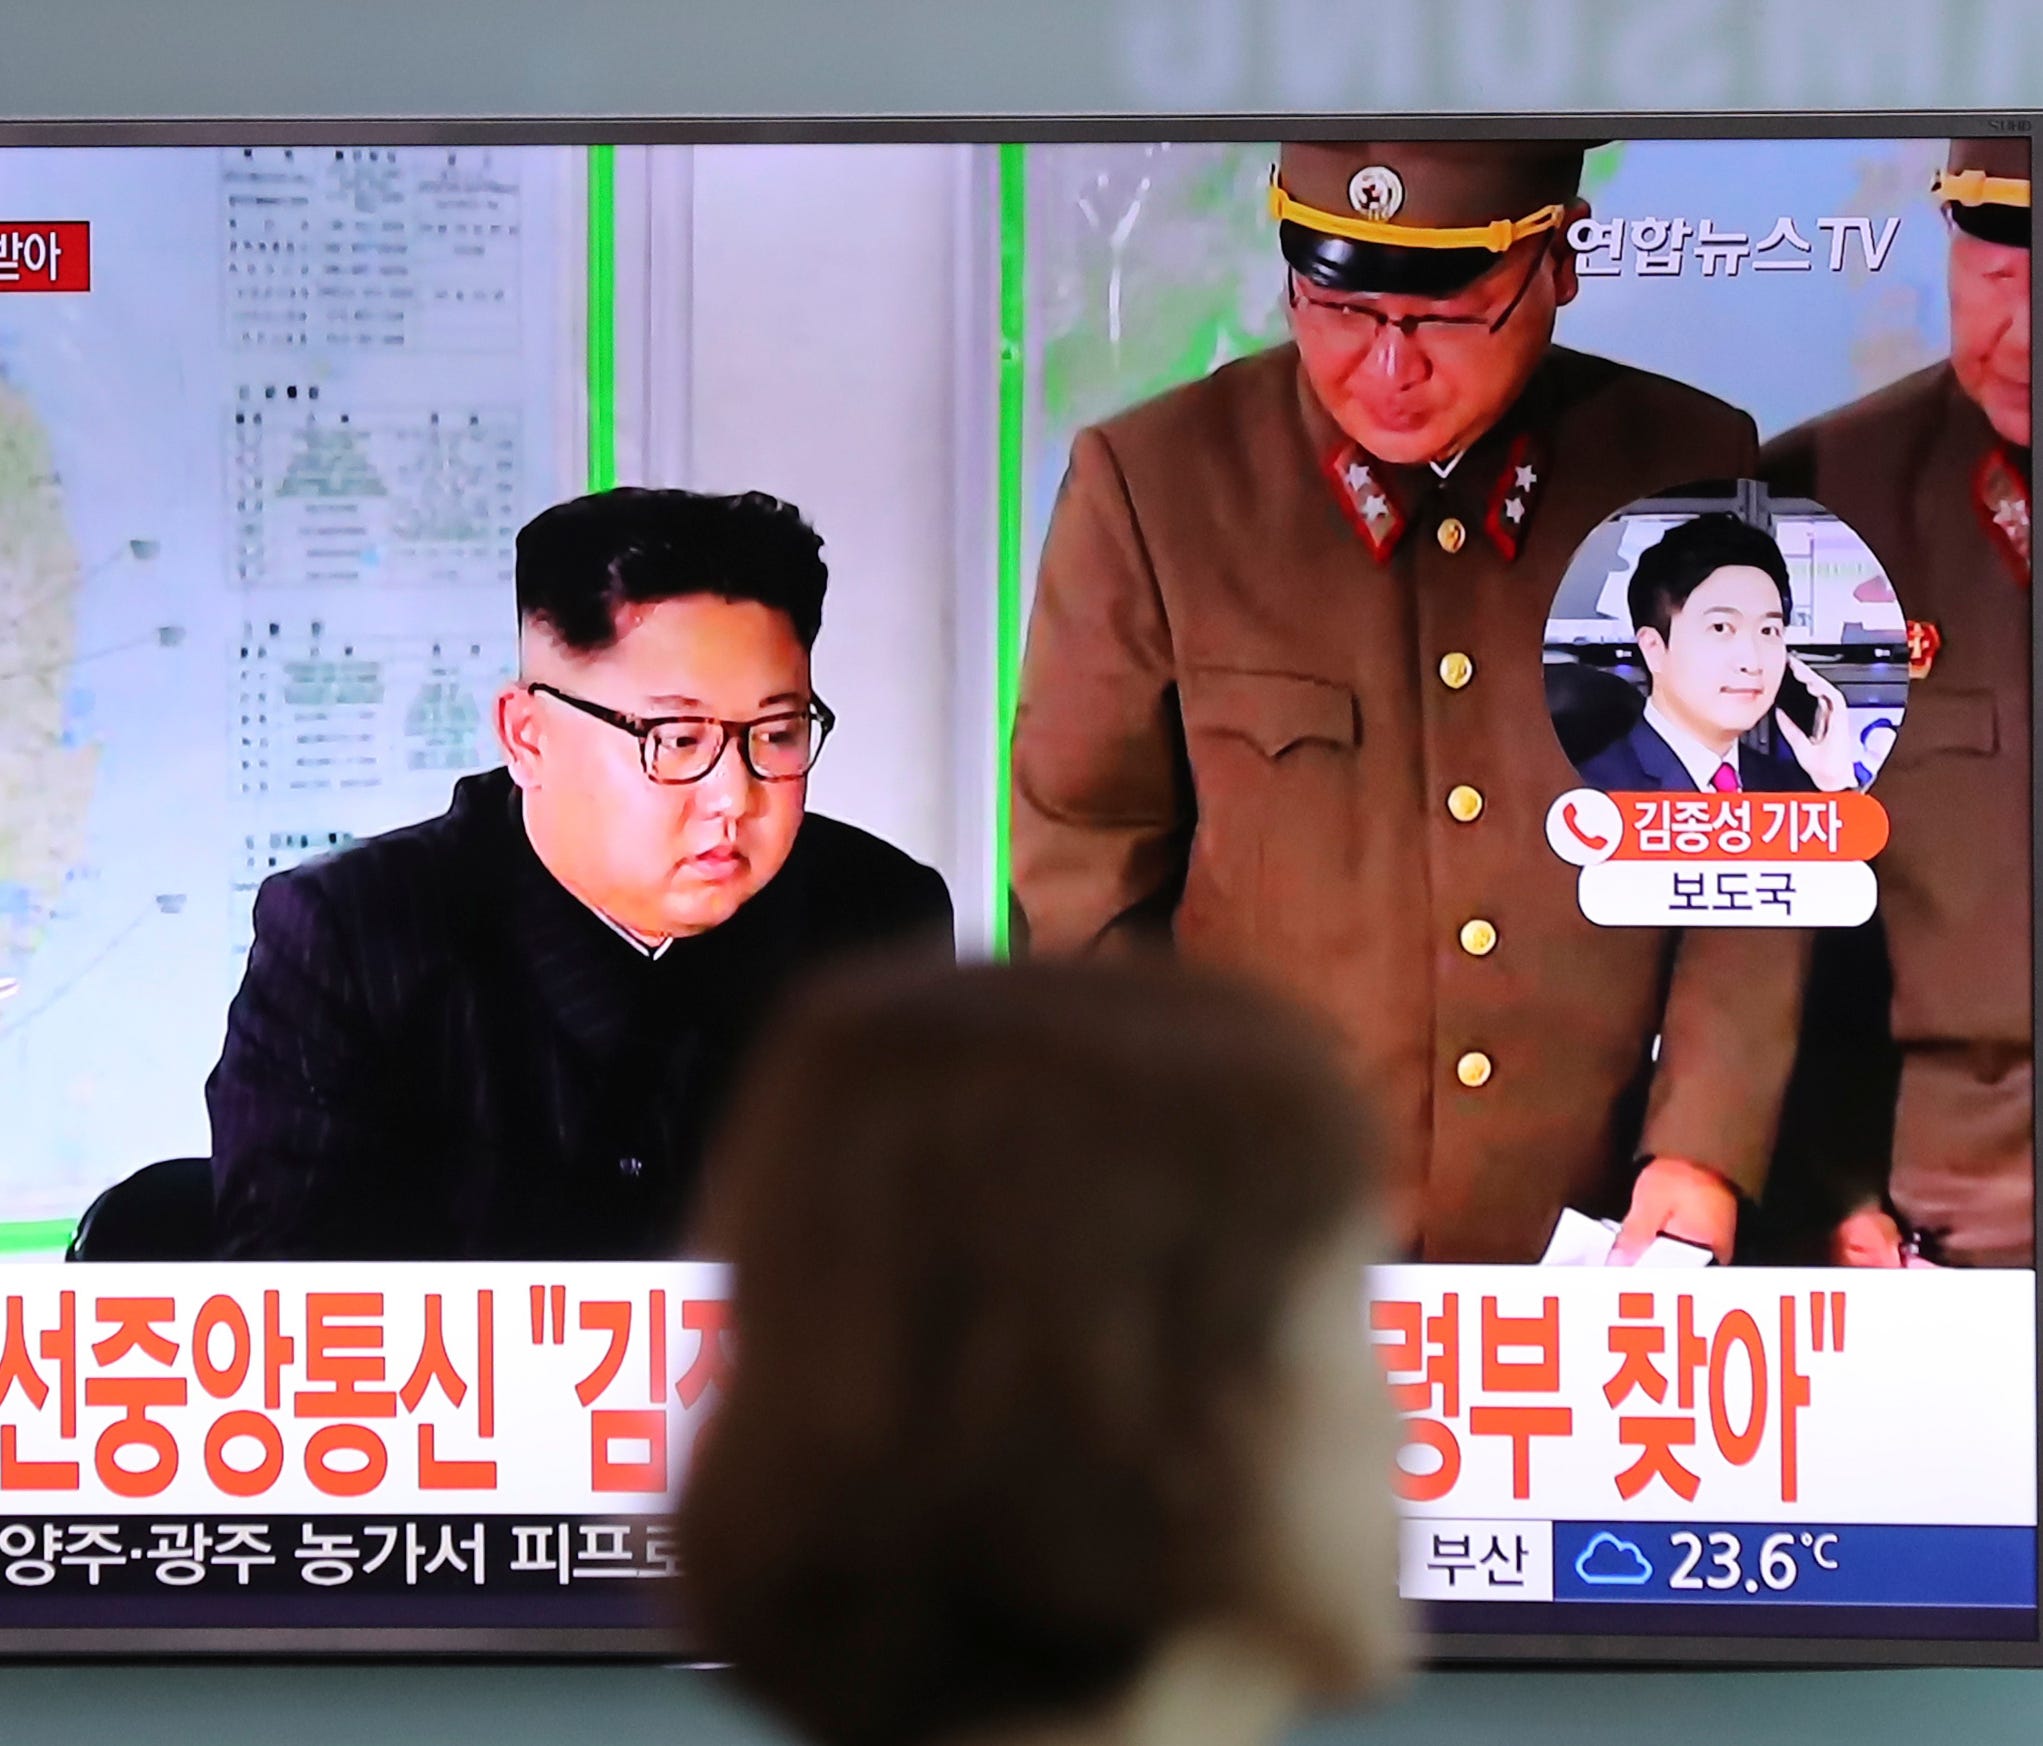 A woman walks by a TV screen showing a local news program reporting about North Korean military's plans to launch missiles into waters near Guam, with an image of North Korean leader Kim Jong Un, at Seoul Train Station in Seoul, South Korea, Tuesday,